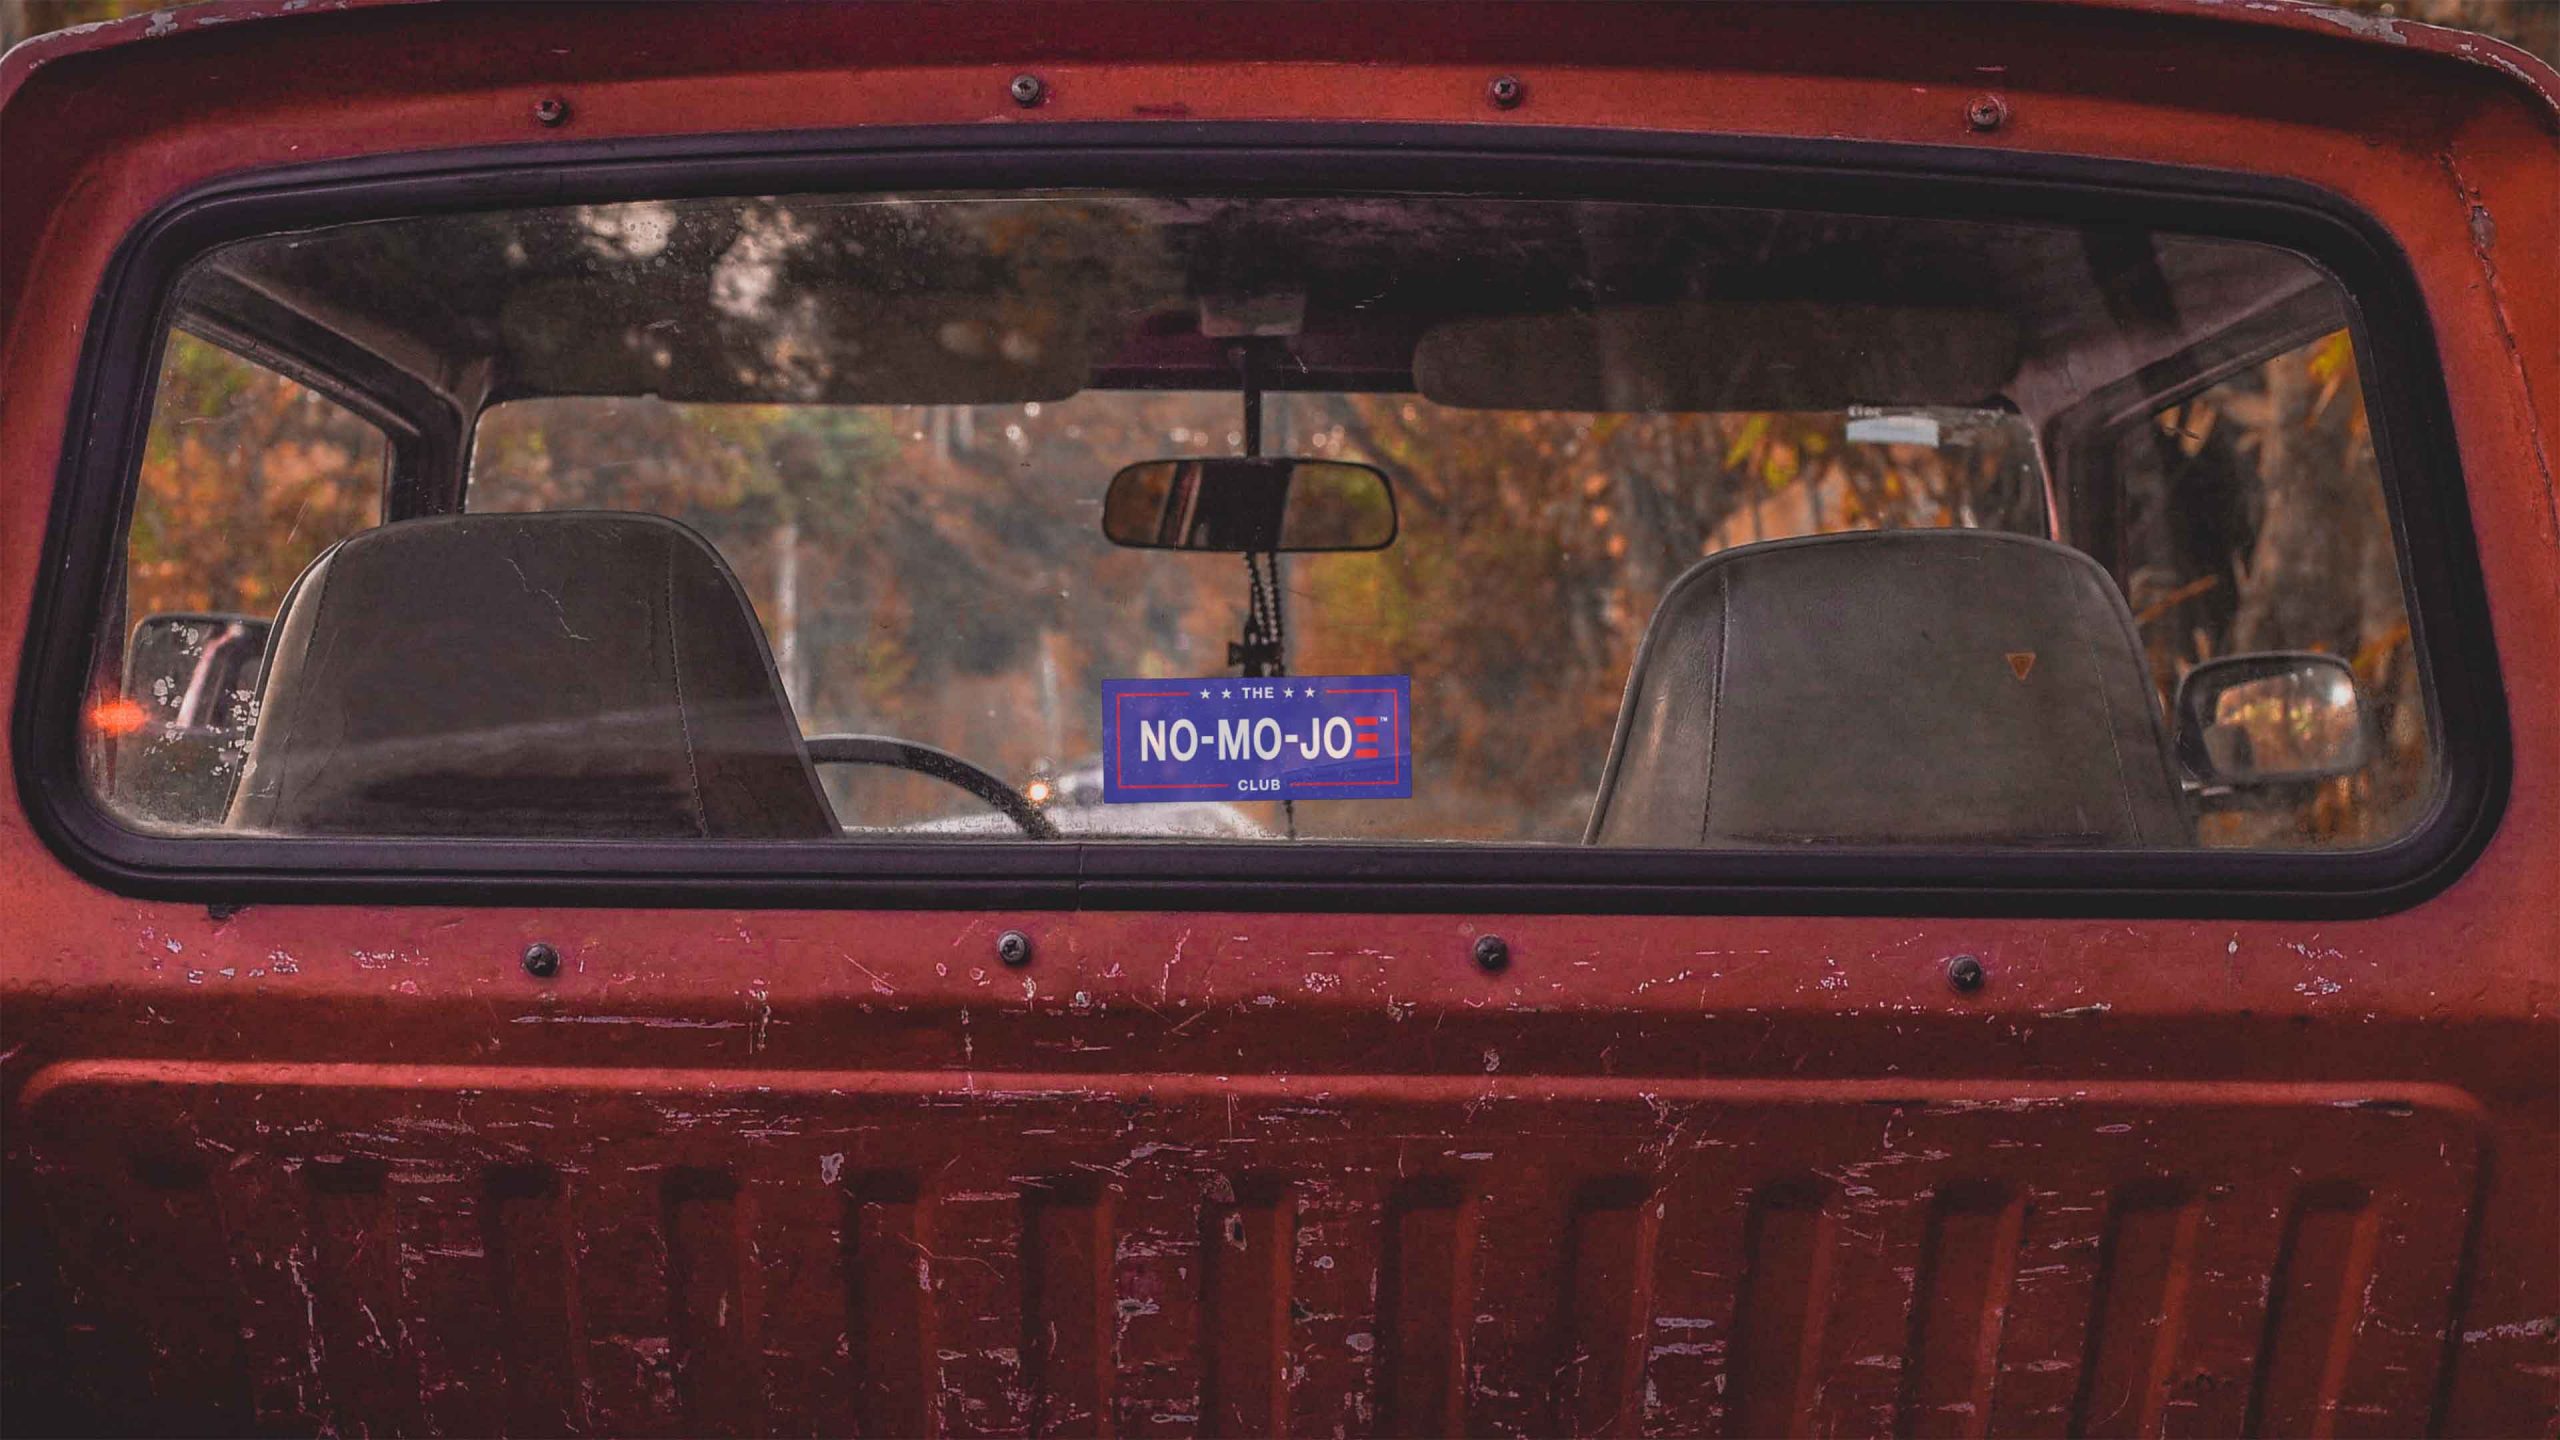 The No-Mo-Joe Club™ window cling on the back window of a scratched, dark red pickup with a rosary hanging from the rear view mirror